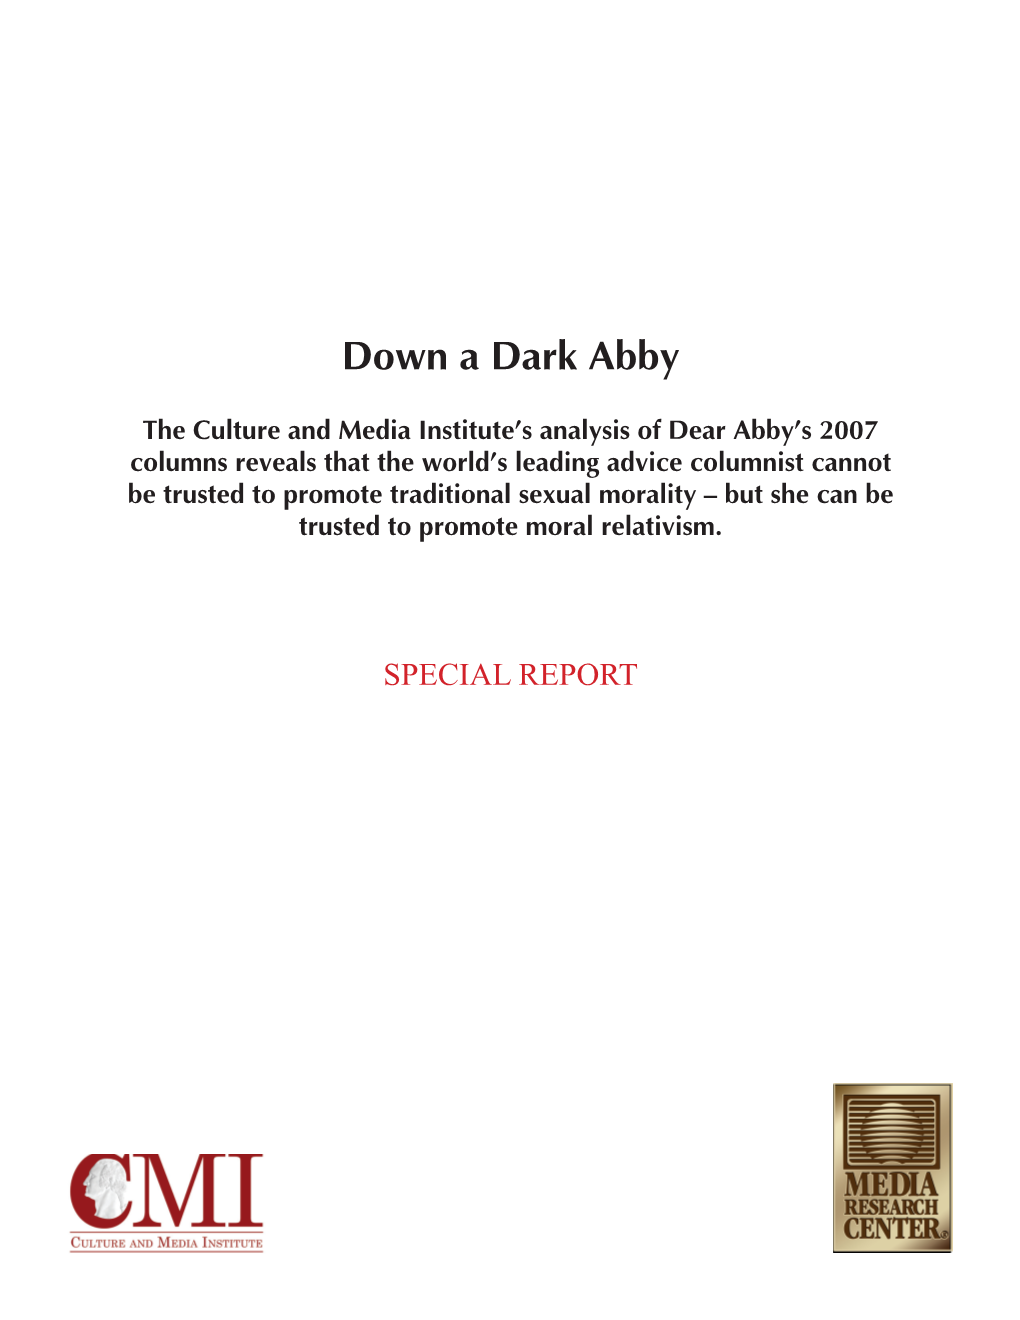 Is Dear Abby Safe Reading for People of All Ages